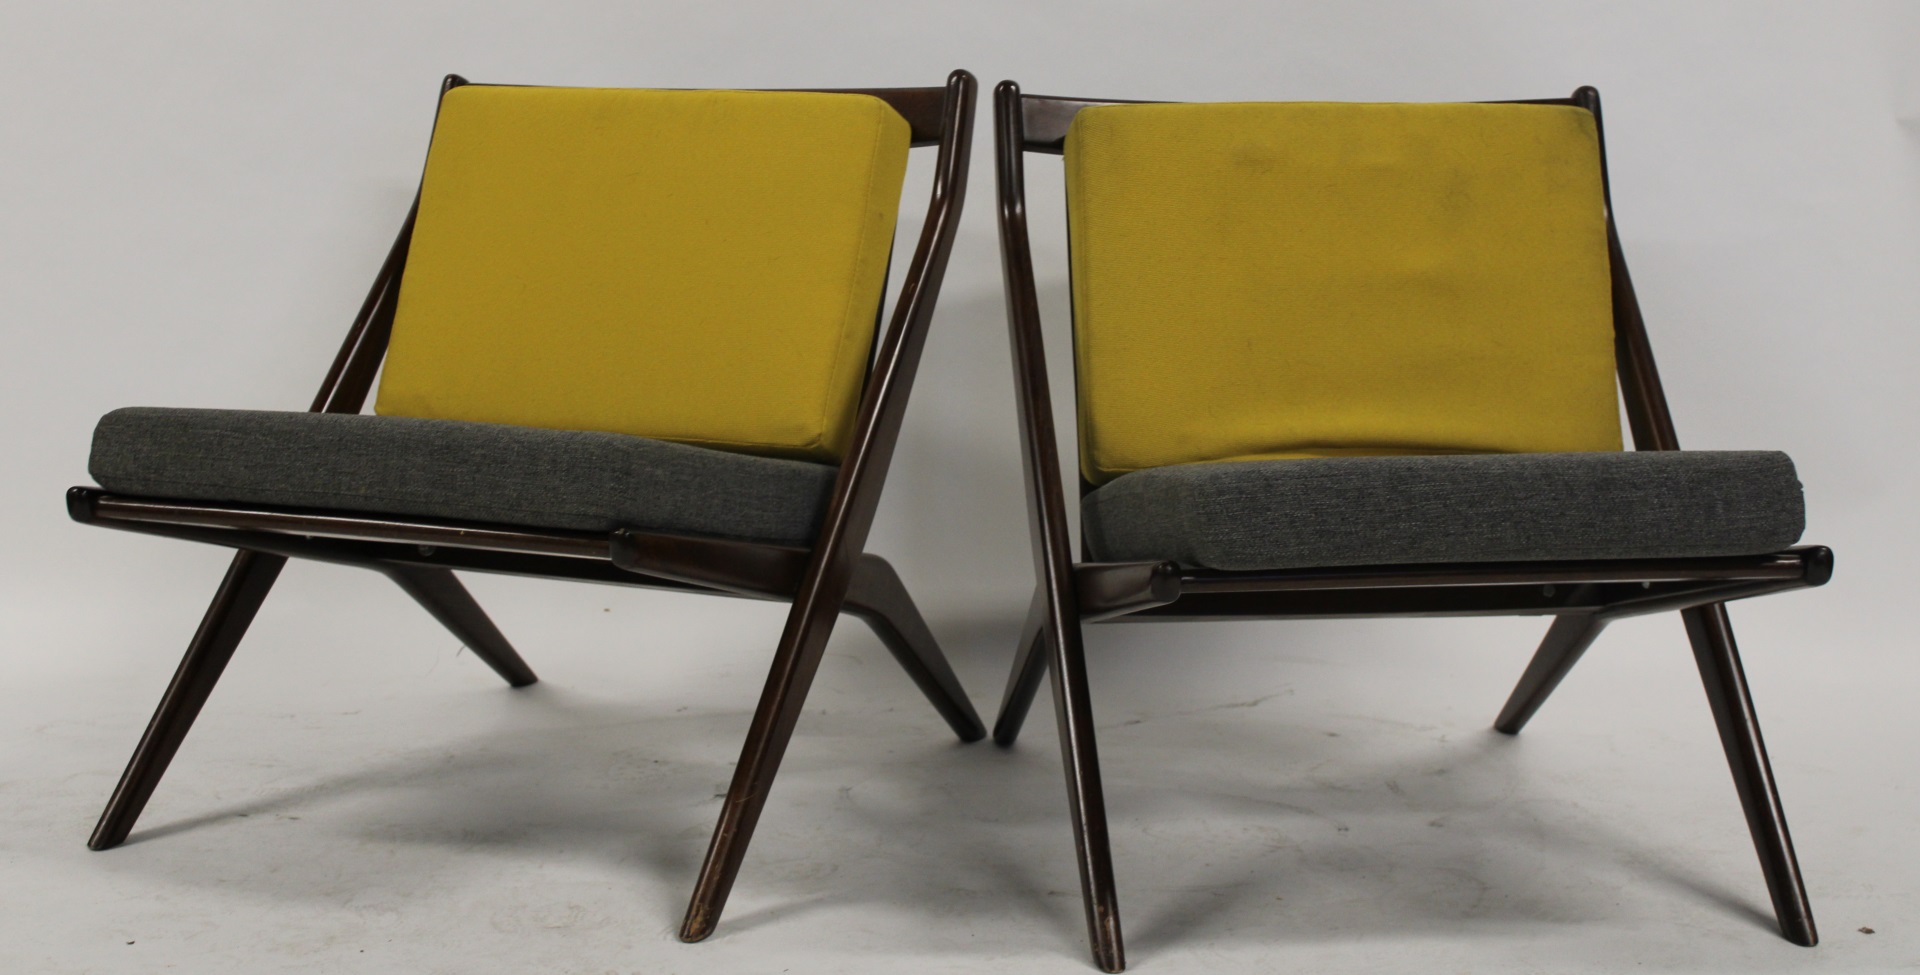 MIDCENTURY DUX SIGNED X FRAME CHAIRS